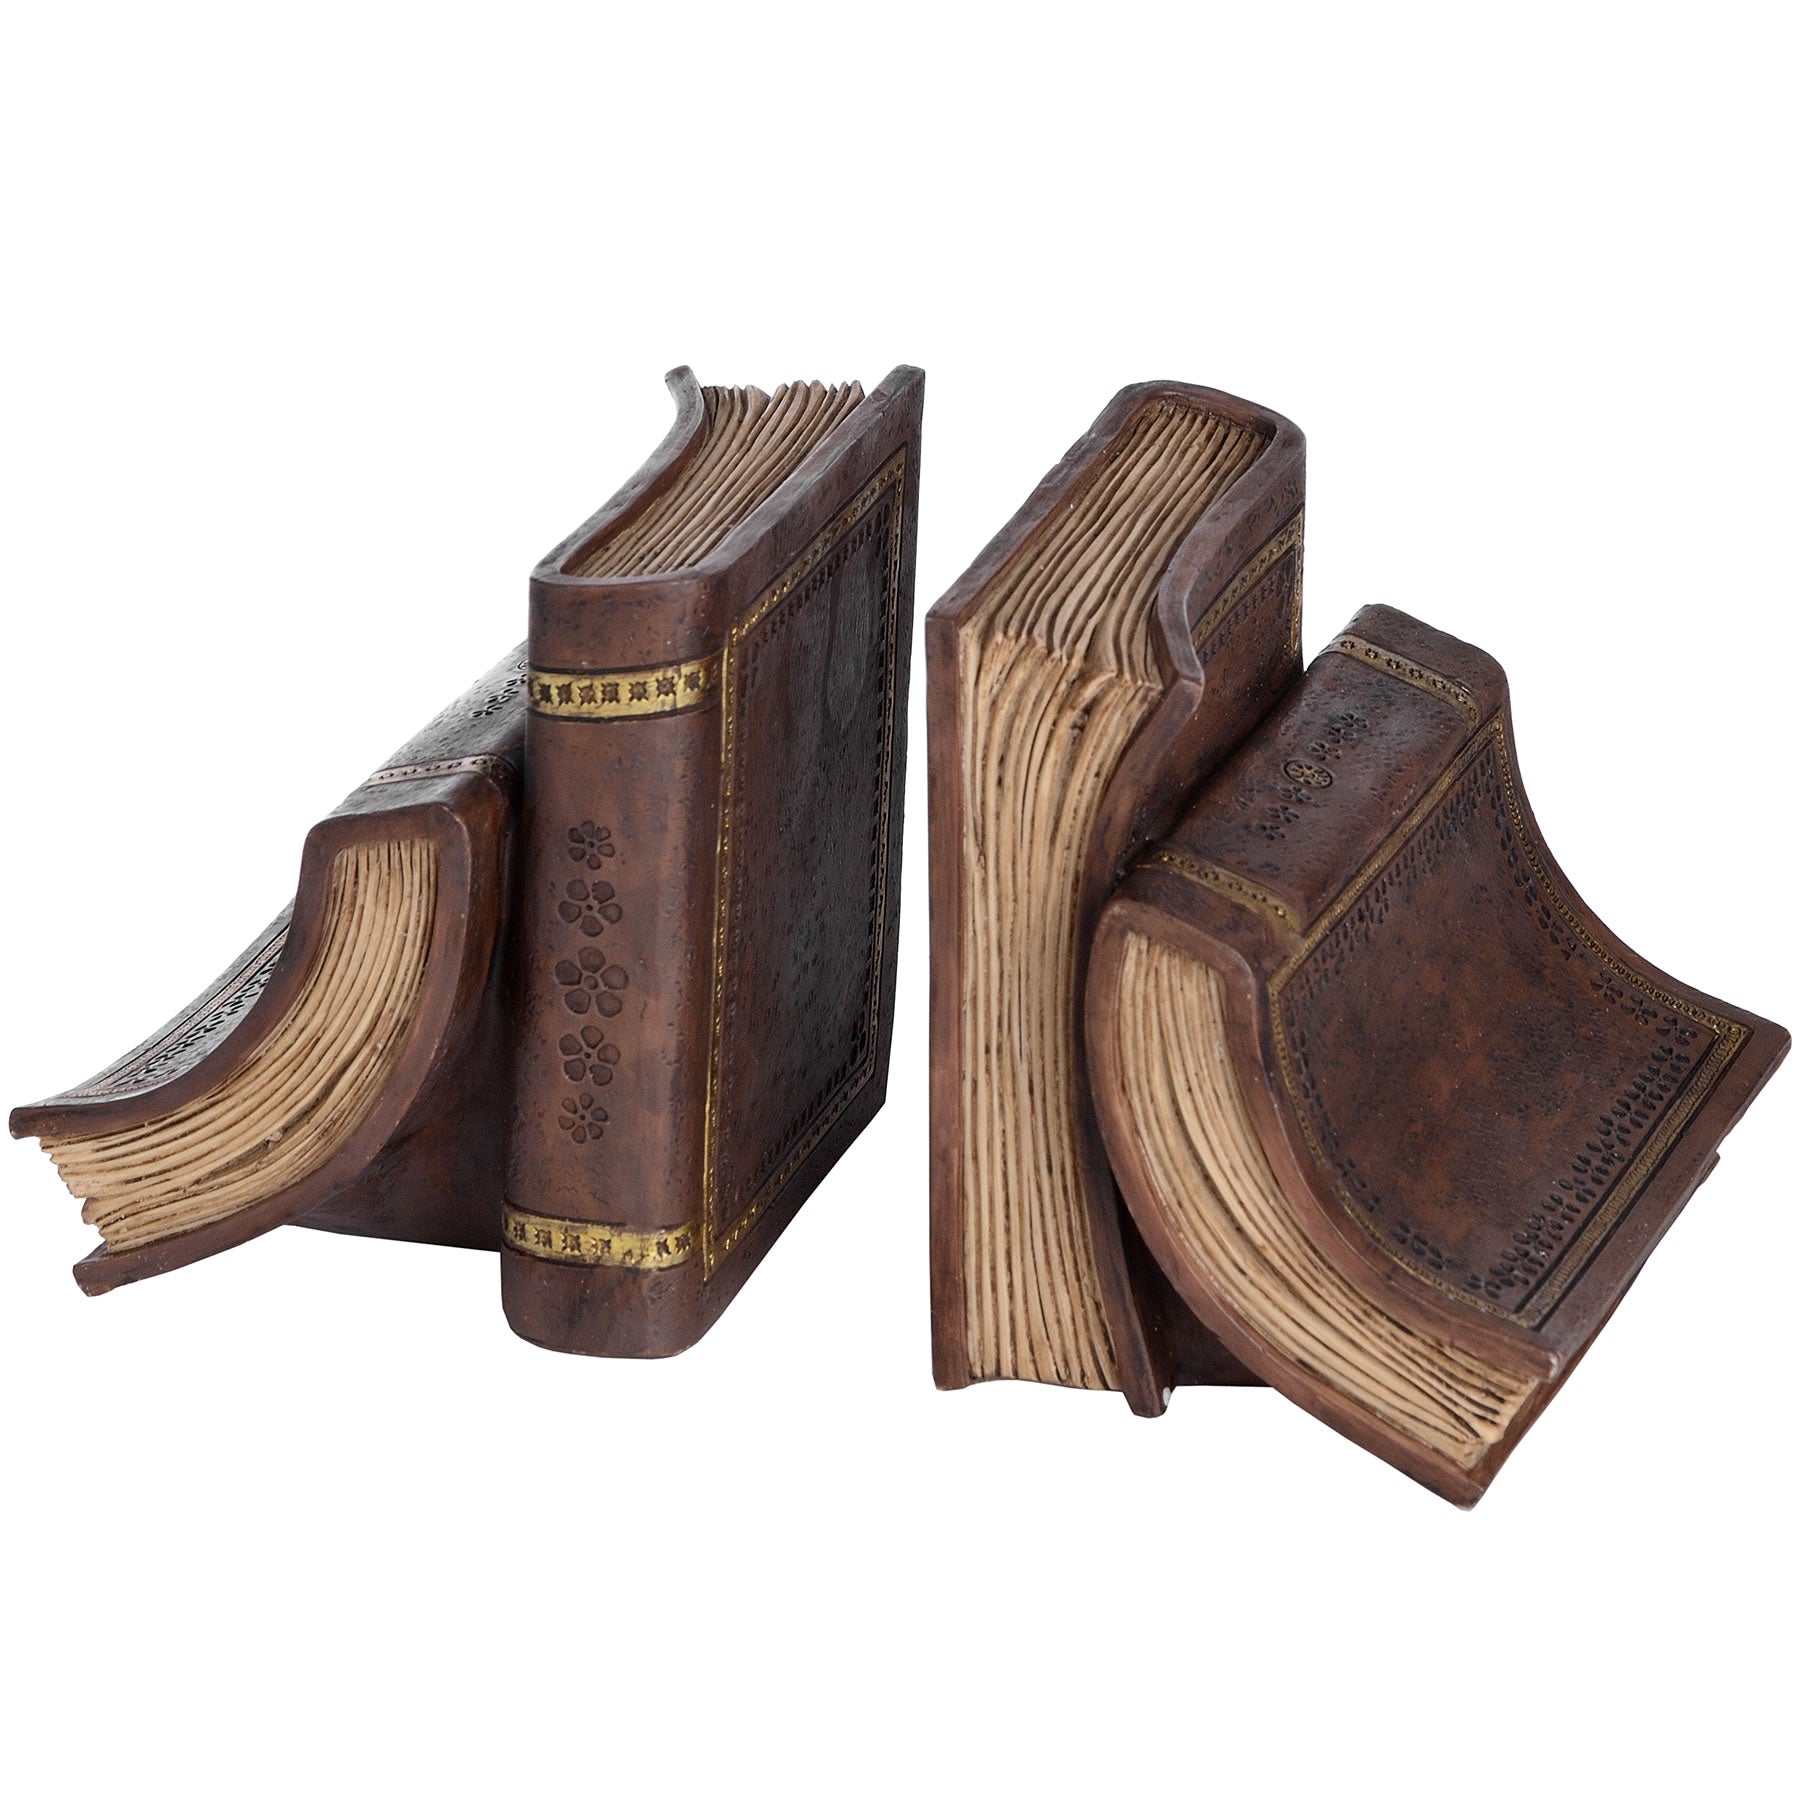 Pair Of Old Books - Antique Bookends - mancavesuperstore